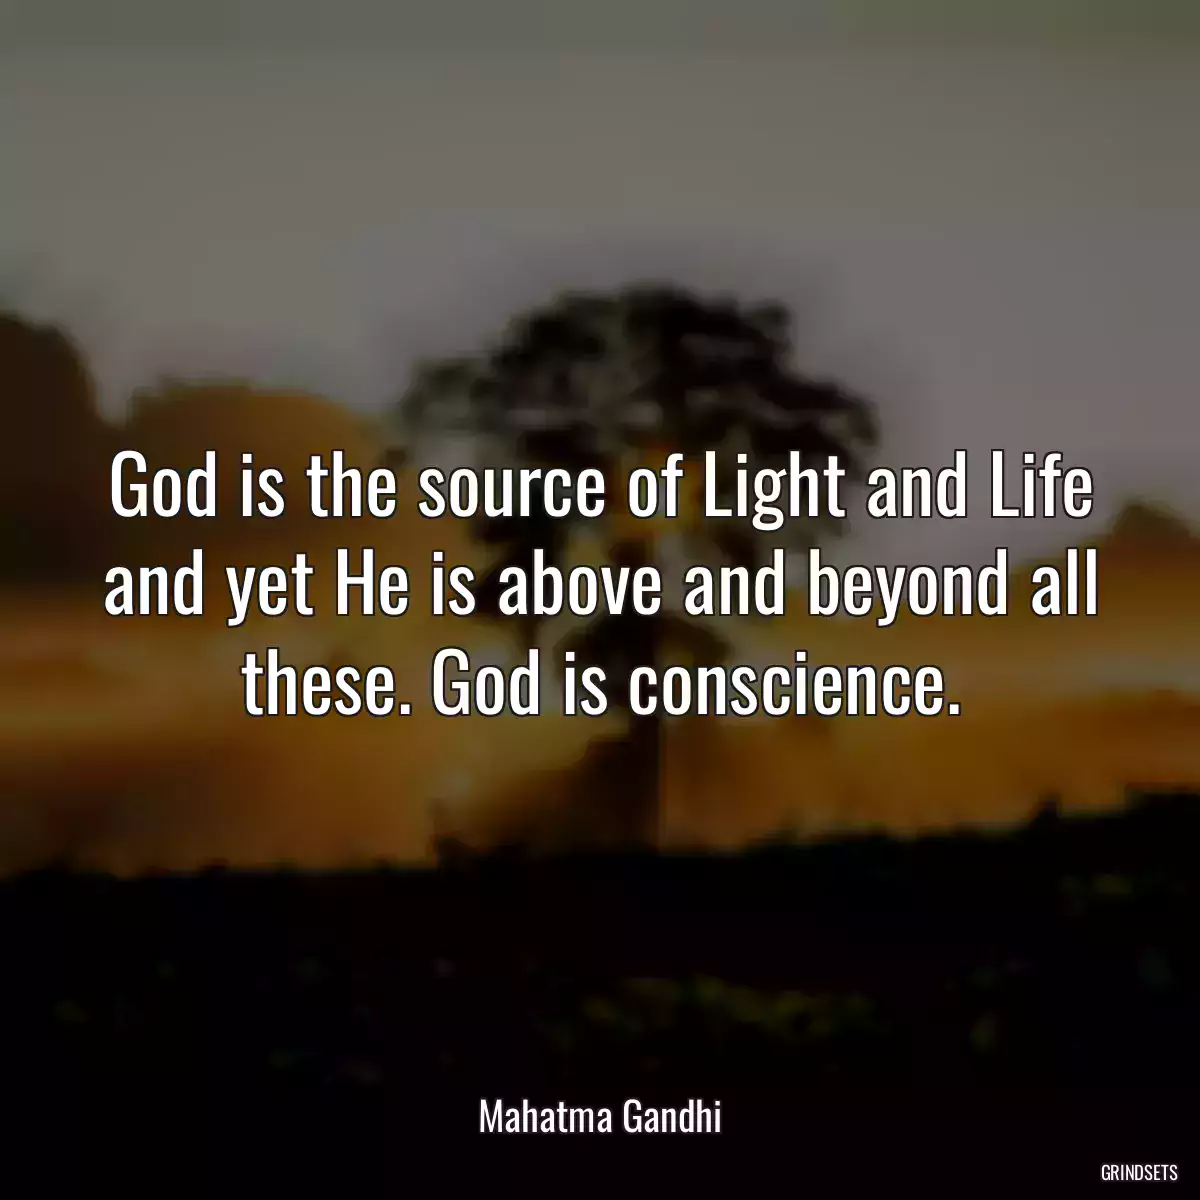 God is the source of Light and Life and yet He is above and beyond all these. God is conscience.